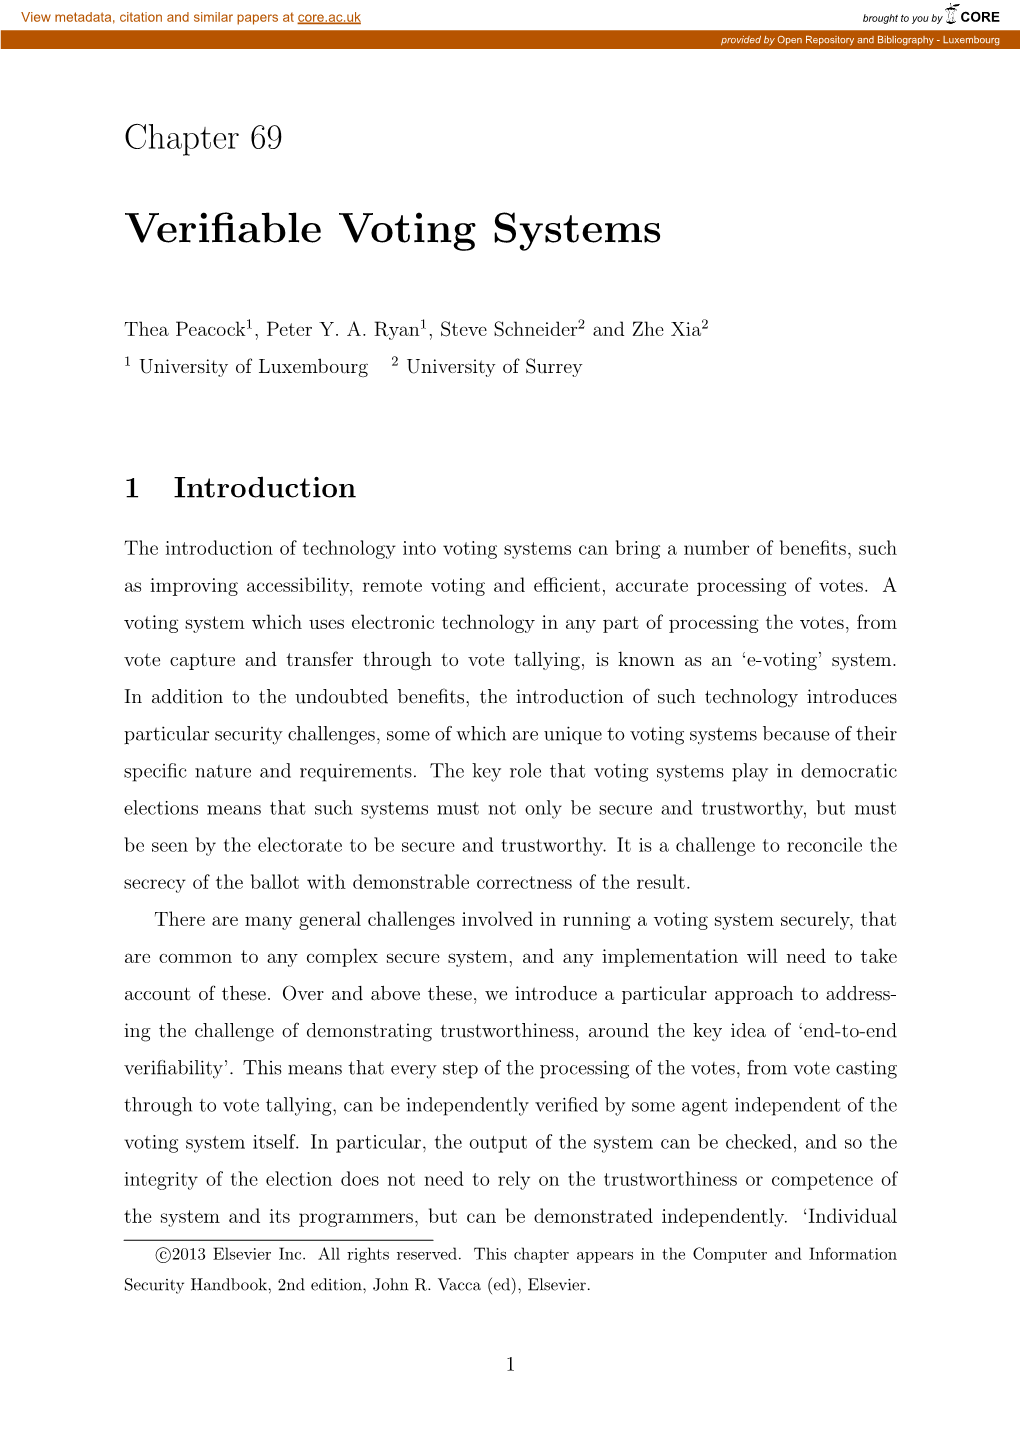 Verifiable Voting Systems